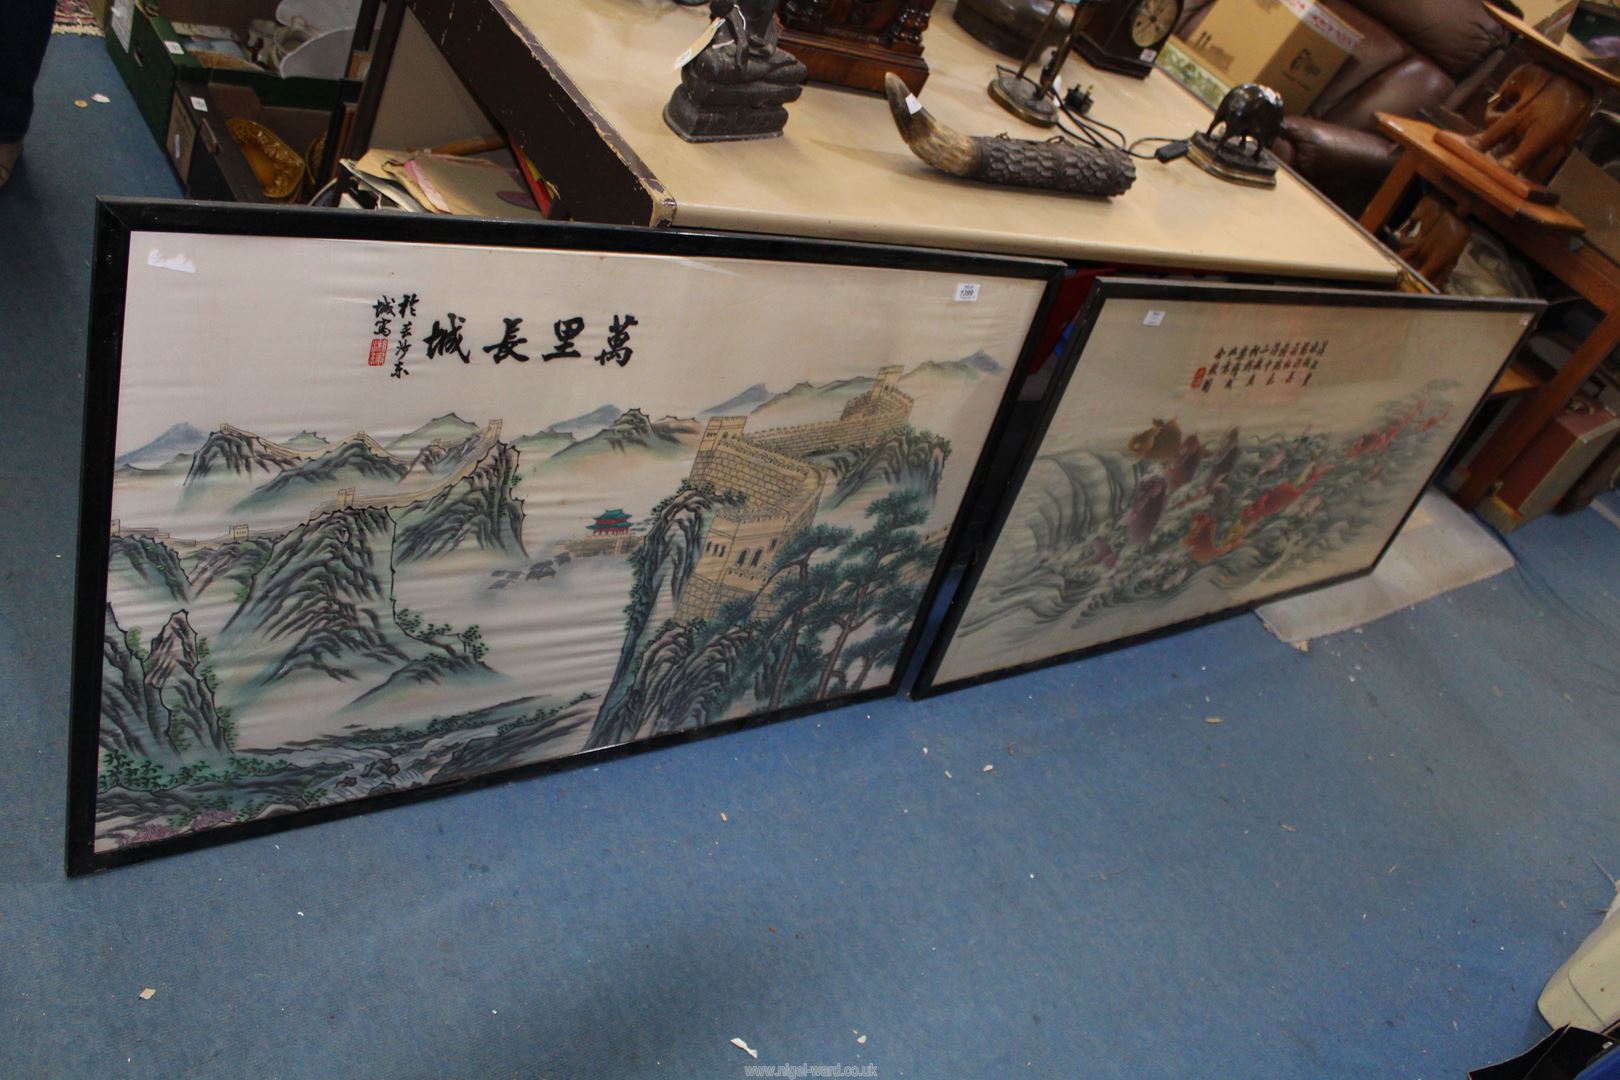 Two large framed Oriental embroideries, one of Koi, other of Great Wall of China, largest 5' x 28".